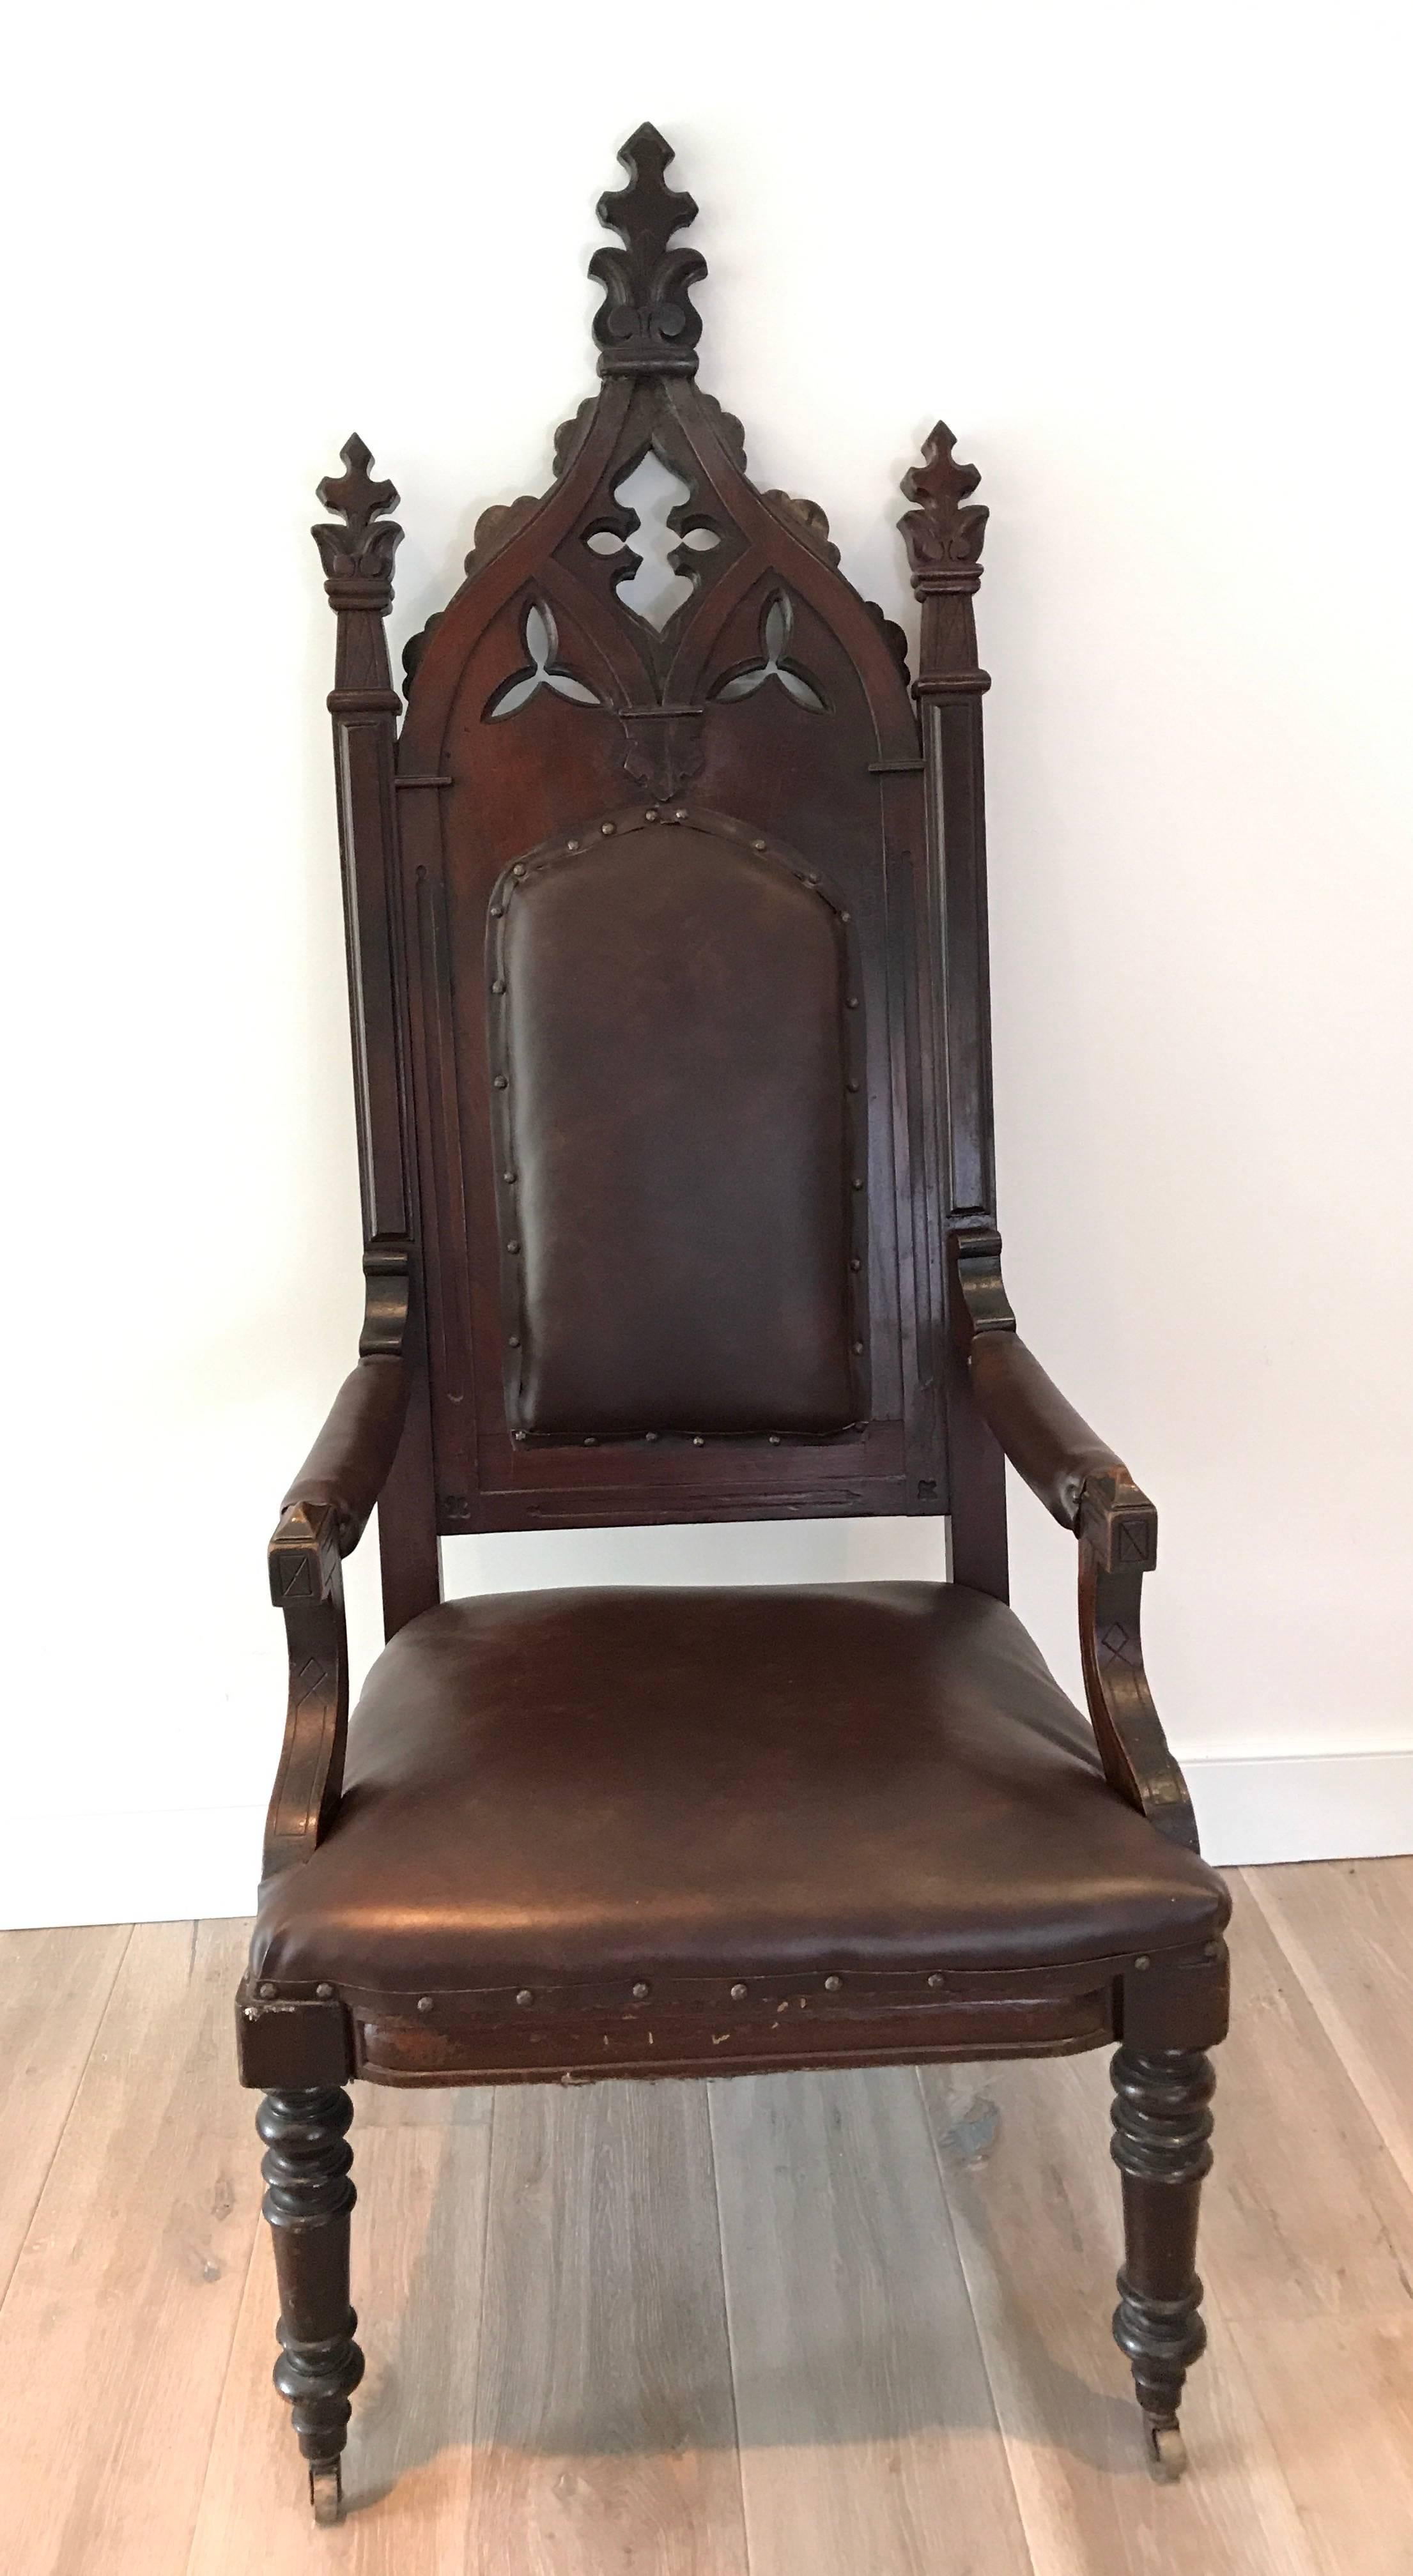 Heavily carved oak 19th century English Gothic Revival armchair with leather upholstery. Measures: 26.5